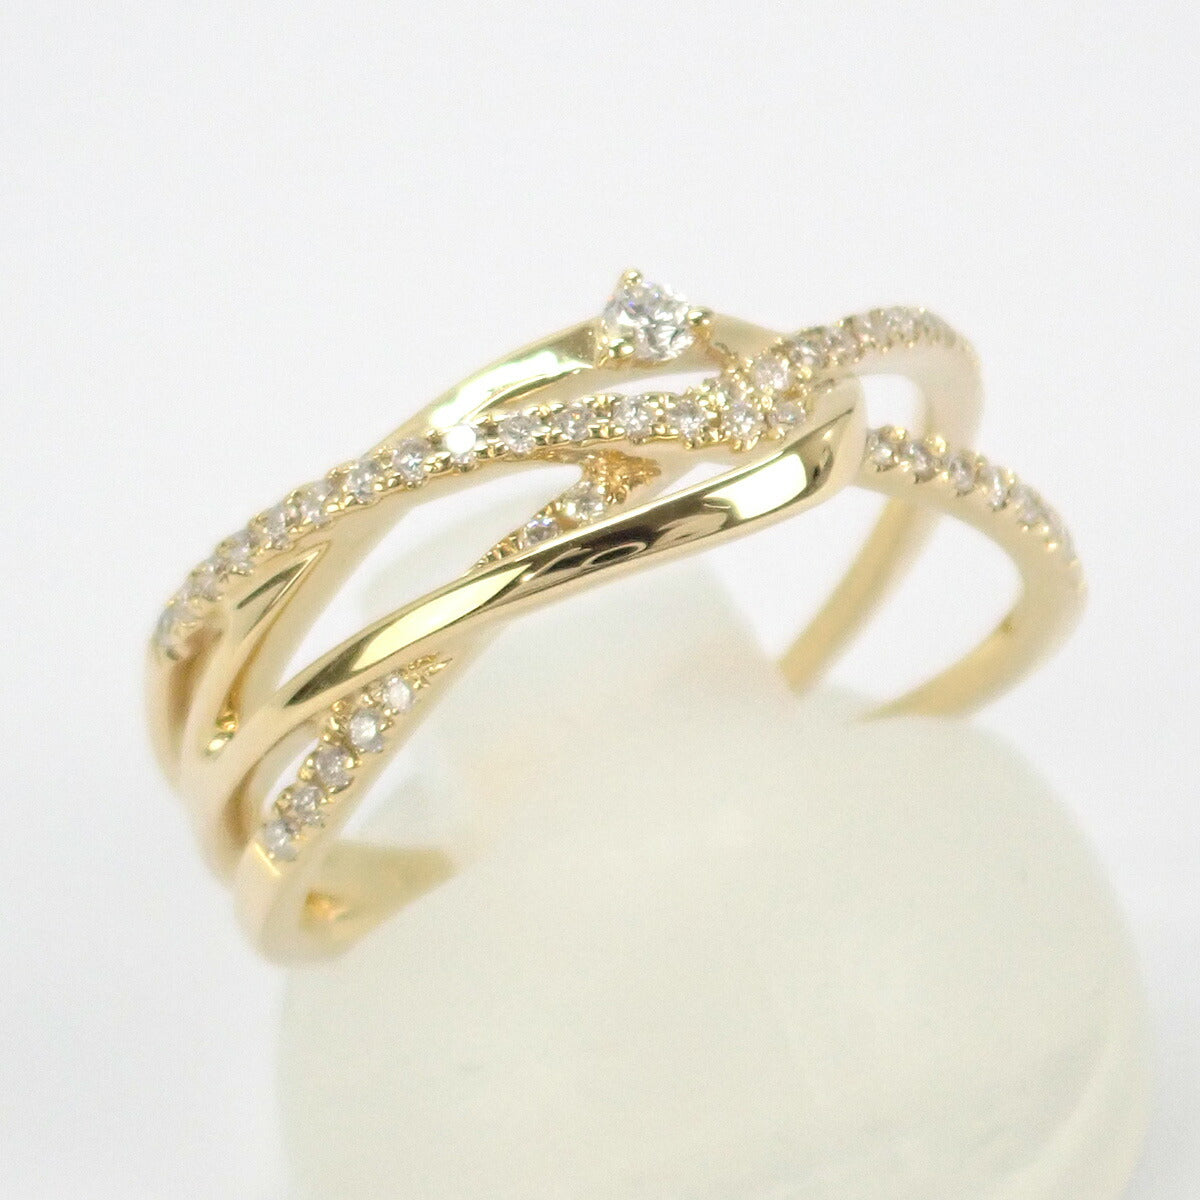 K18YG Diamond Ring, Size 14.5, Yellow Gold Finish, Ladies (Pre-owned)